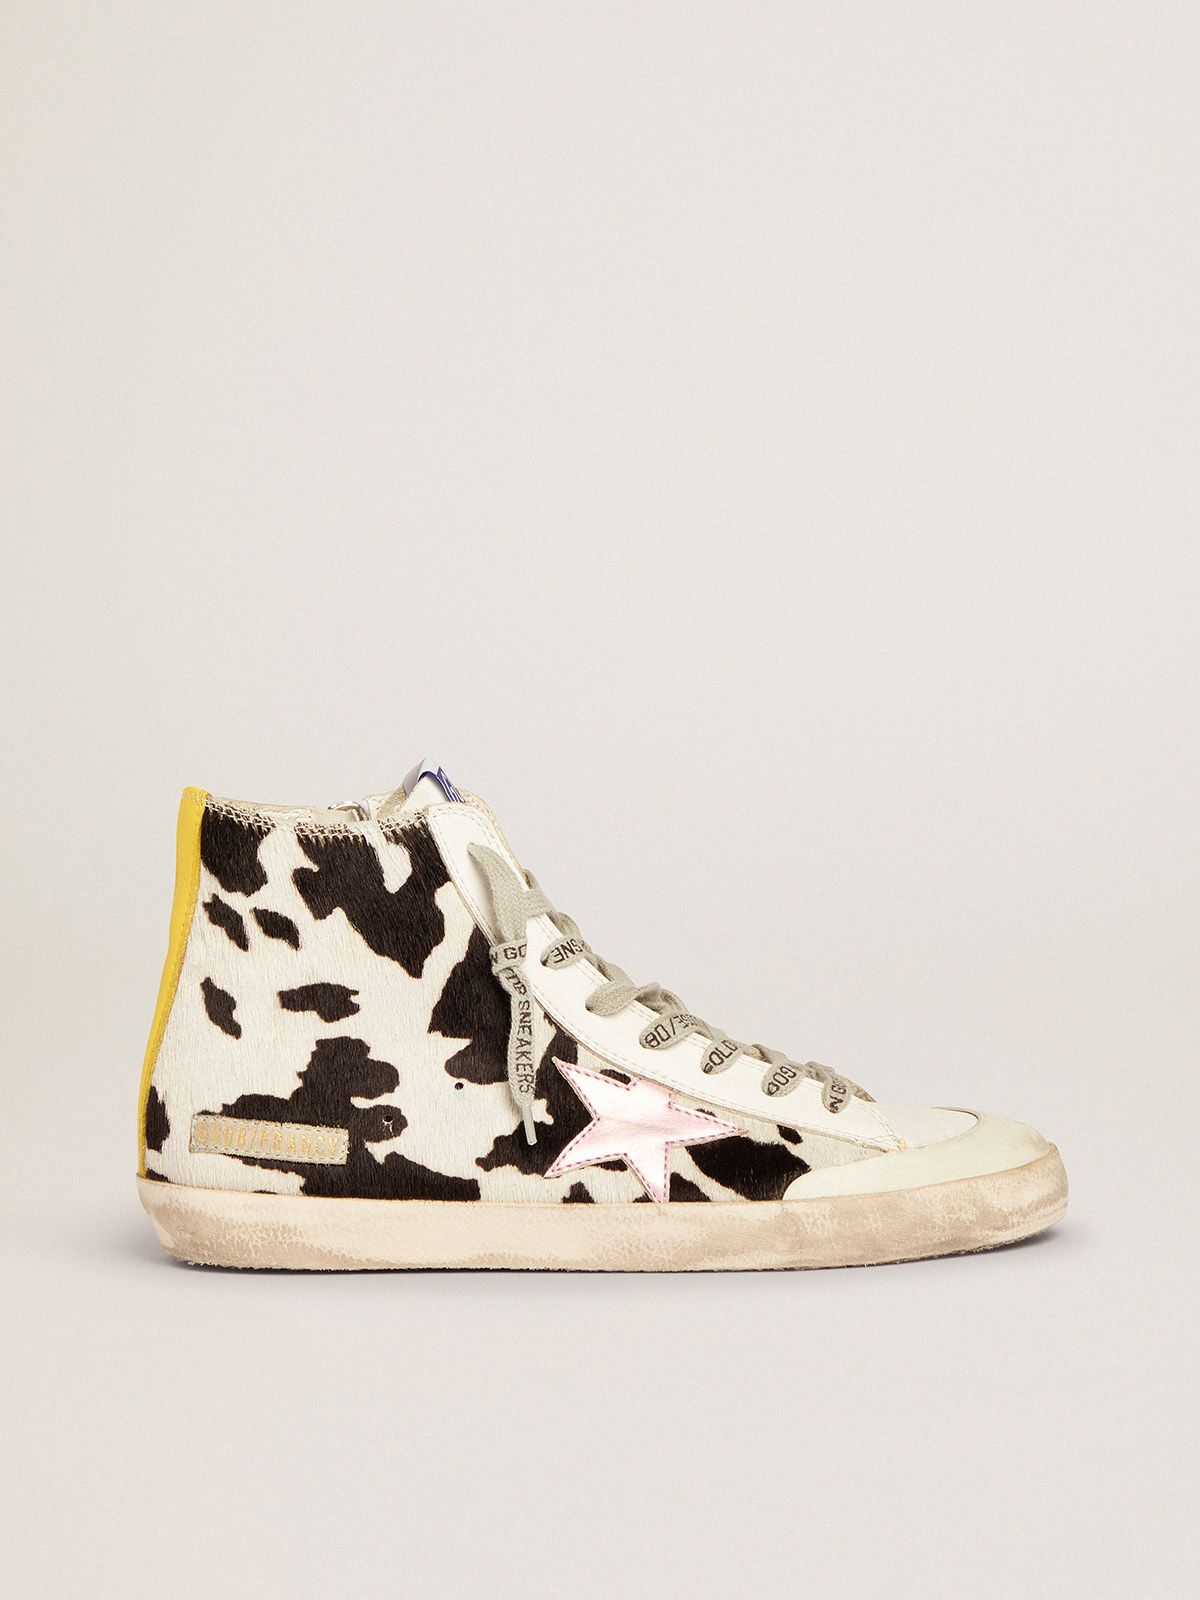 golden goose laminated pink cow-print in pony Francy leather sneakers star with Penstar skin